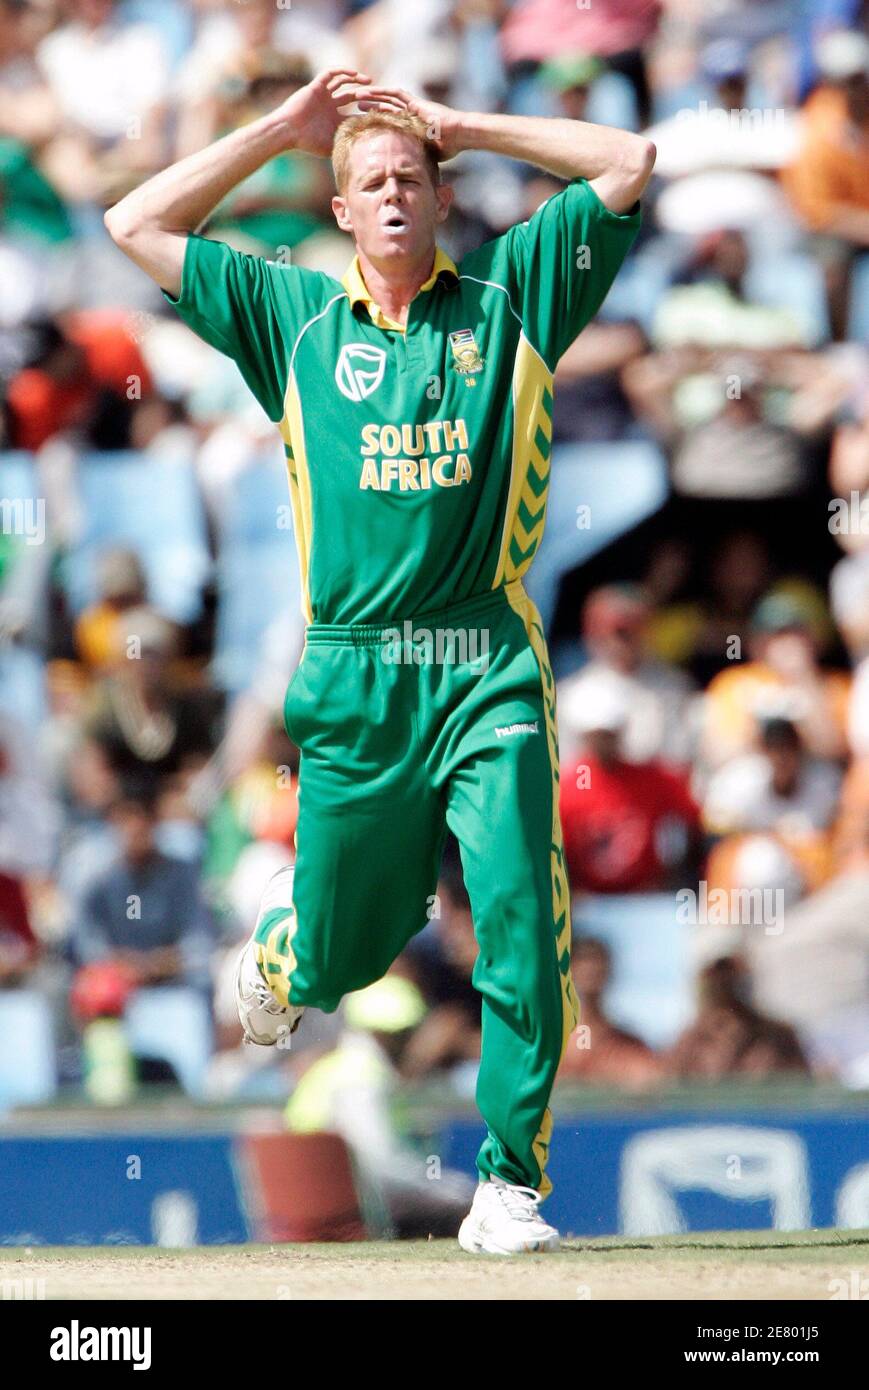 south-africas-shaun-pollock-reacts-after-missing-a-wicket-during-the-first-one-day-international-cricket-match-against-pakistan-in-pretoria-february-4-2007-reuterssiphiwe-sibeko-south-africa-2E801J5.jpg